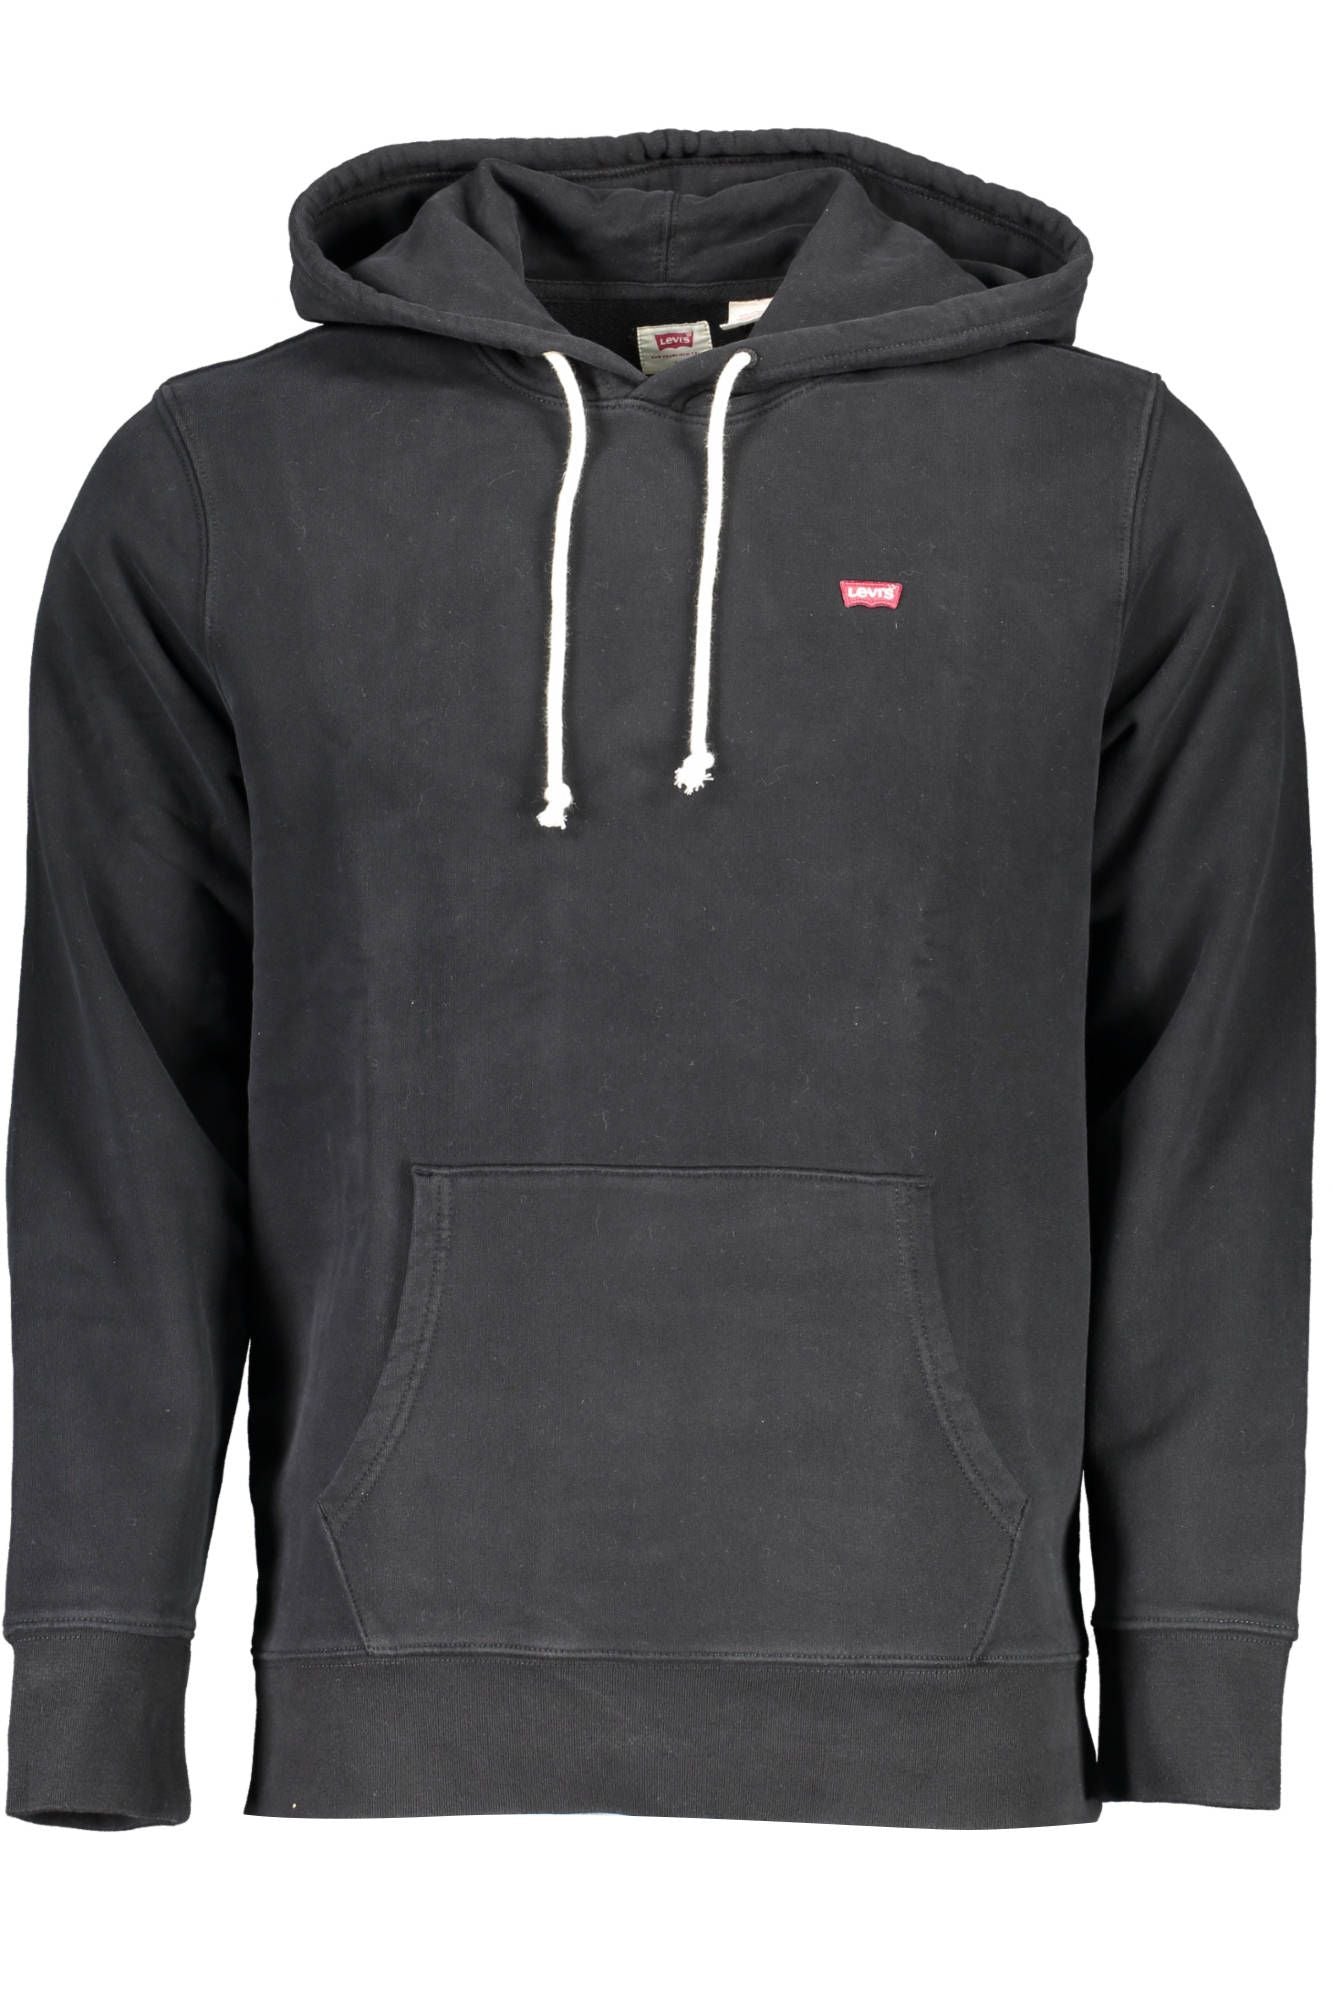 Levi's Sleek Cotton Hoodie with Central Pocket